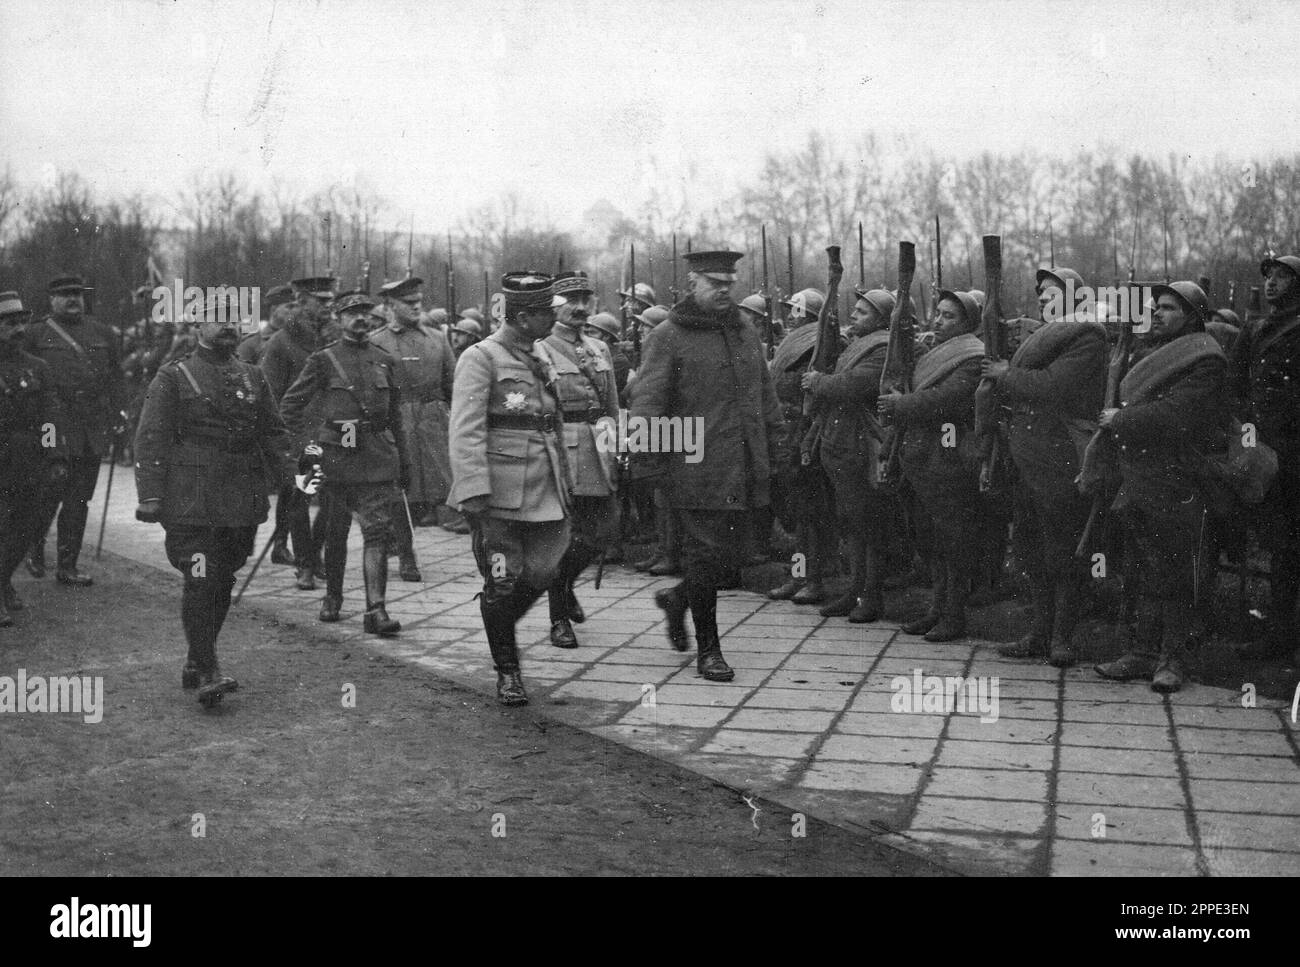 American General Joseph Dickman with French Generals Charles Mangin and Augustein Gérard inspecting troops American soldiers drilling in Coblenz in 1919 in 1919 during the Allied occupation of the Rhineland. After WW1 the Allies occupied the left bank of the Rhine for 11 years. Stock Photo